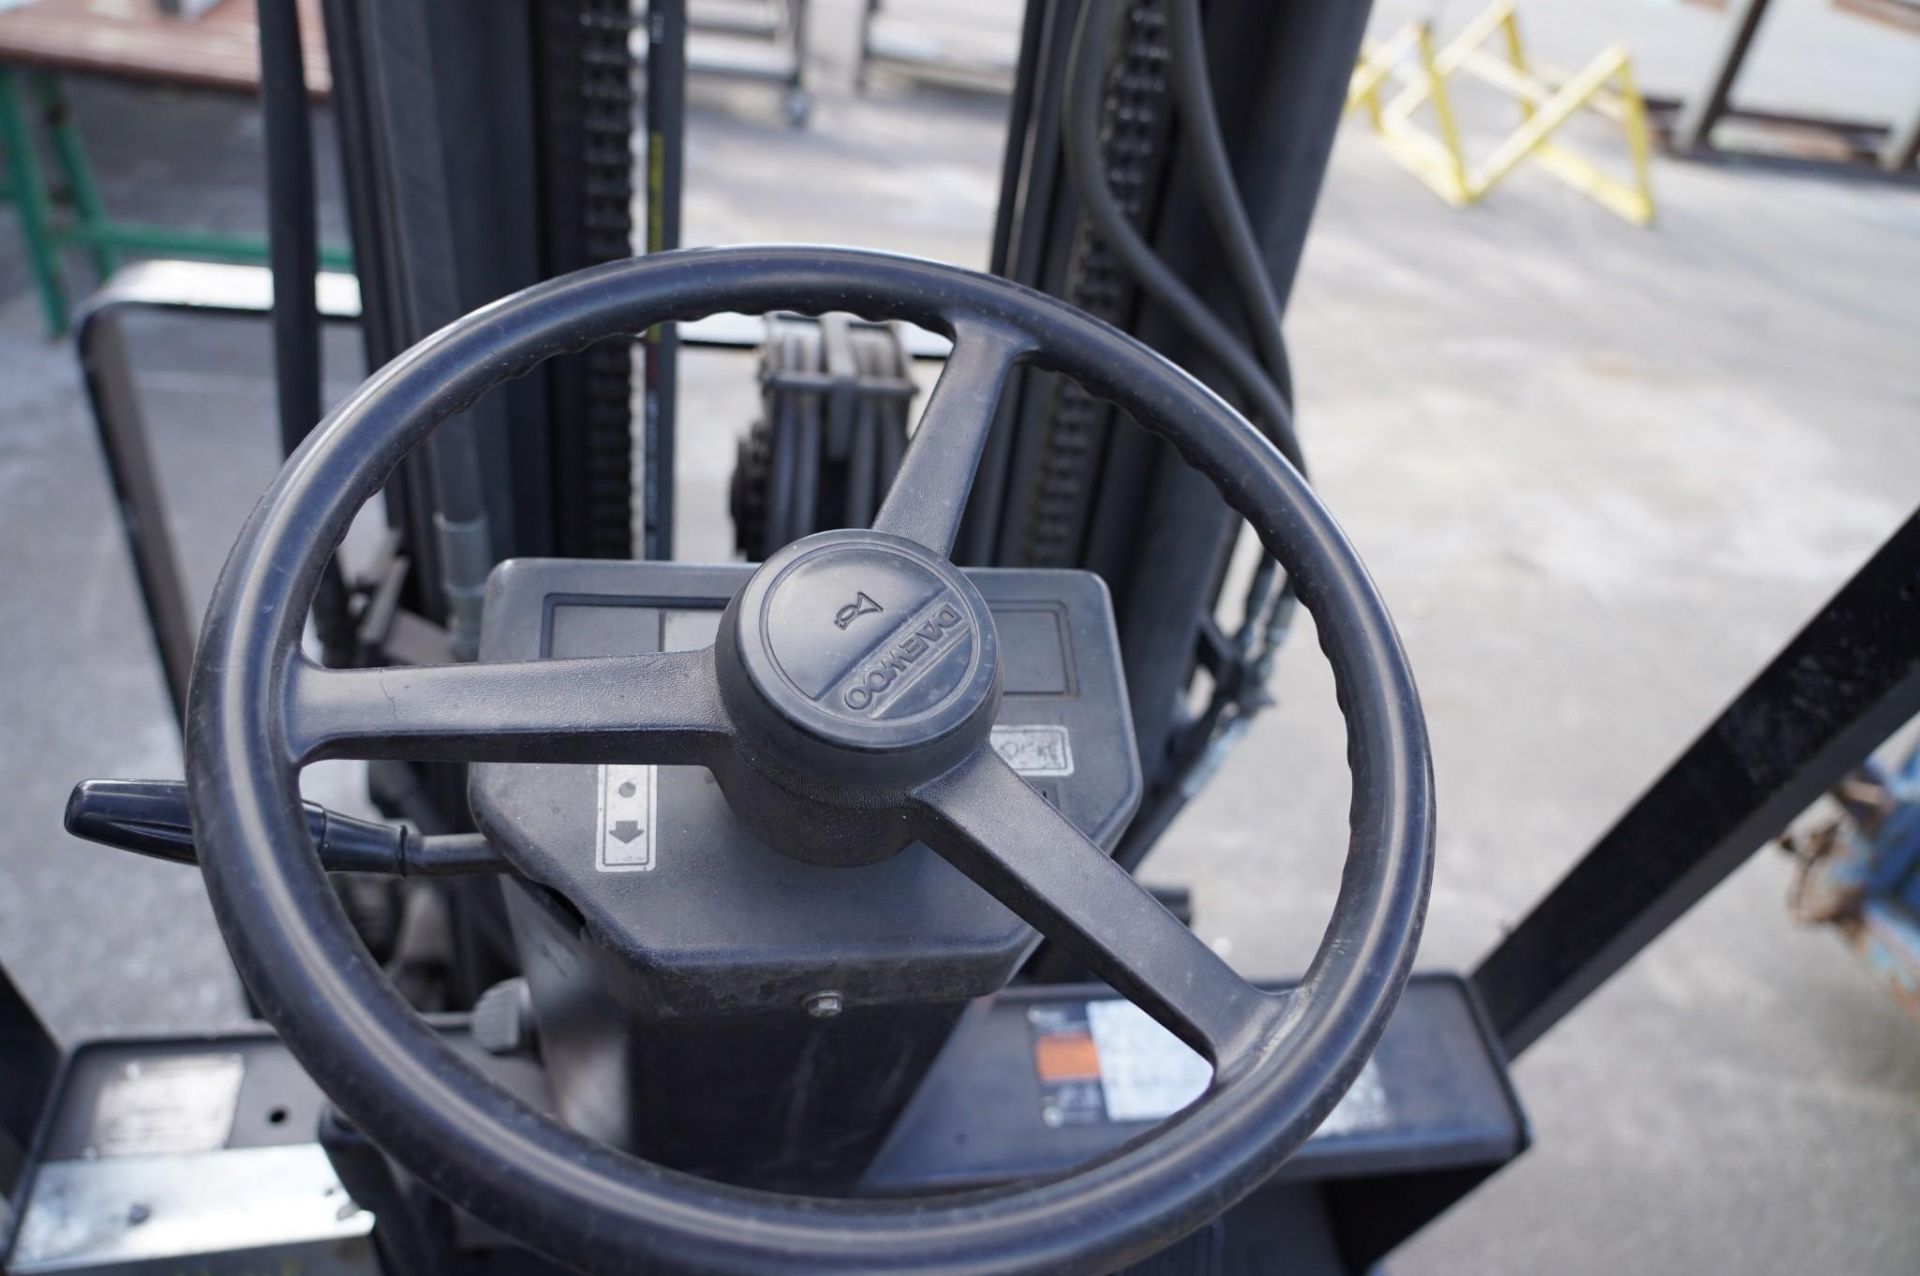 DAEWOO GC30E 5,000 LBS. CAPACITY FORKLIFT - Image 7 of 14